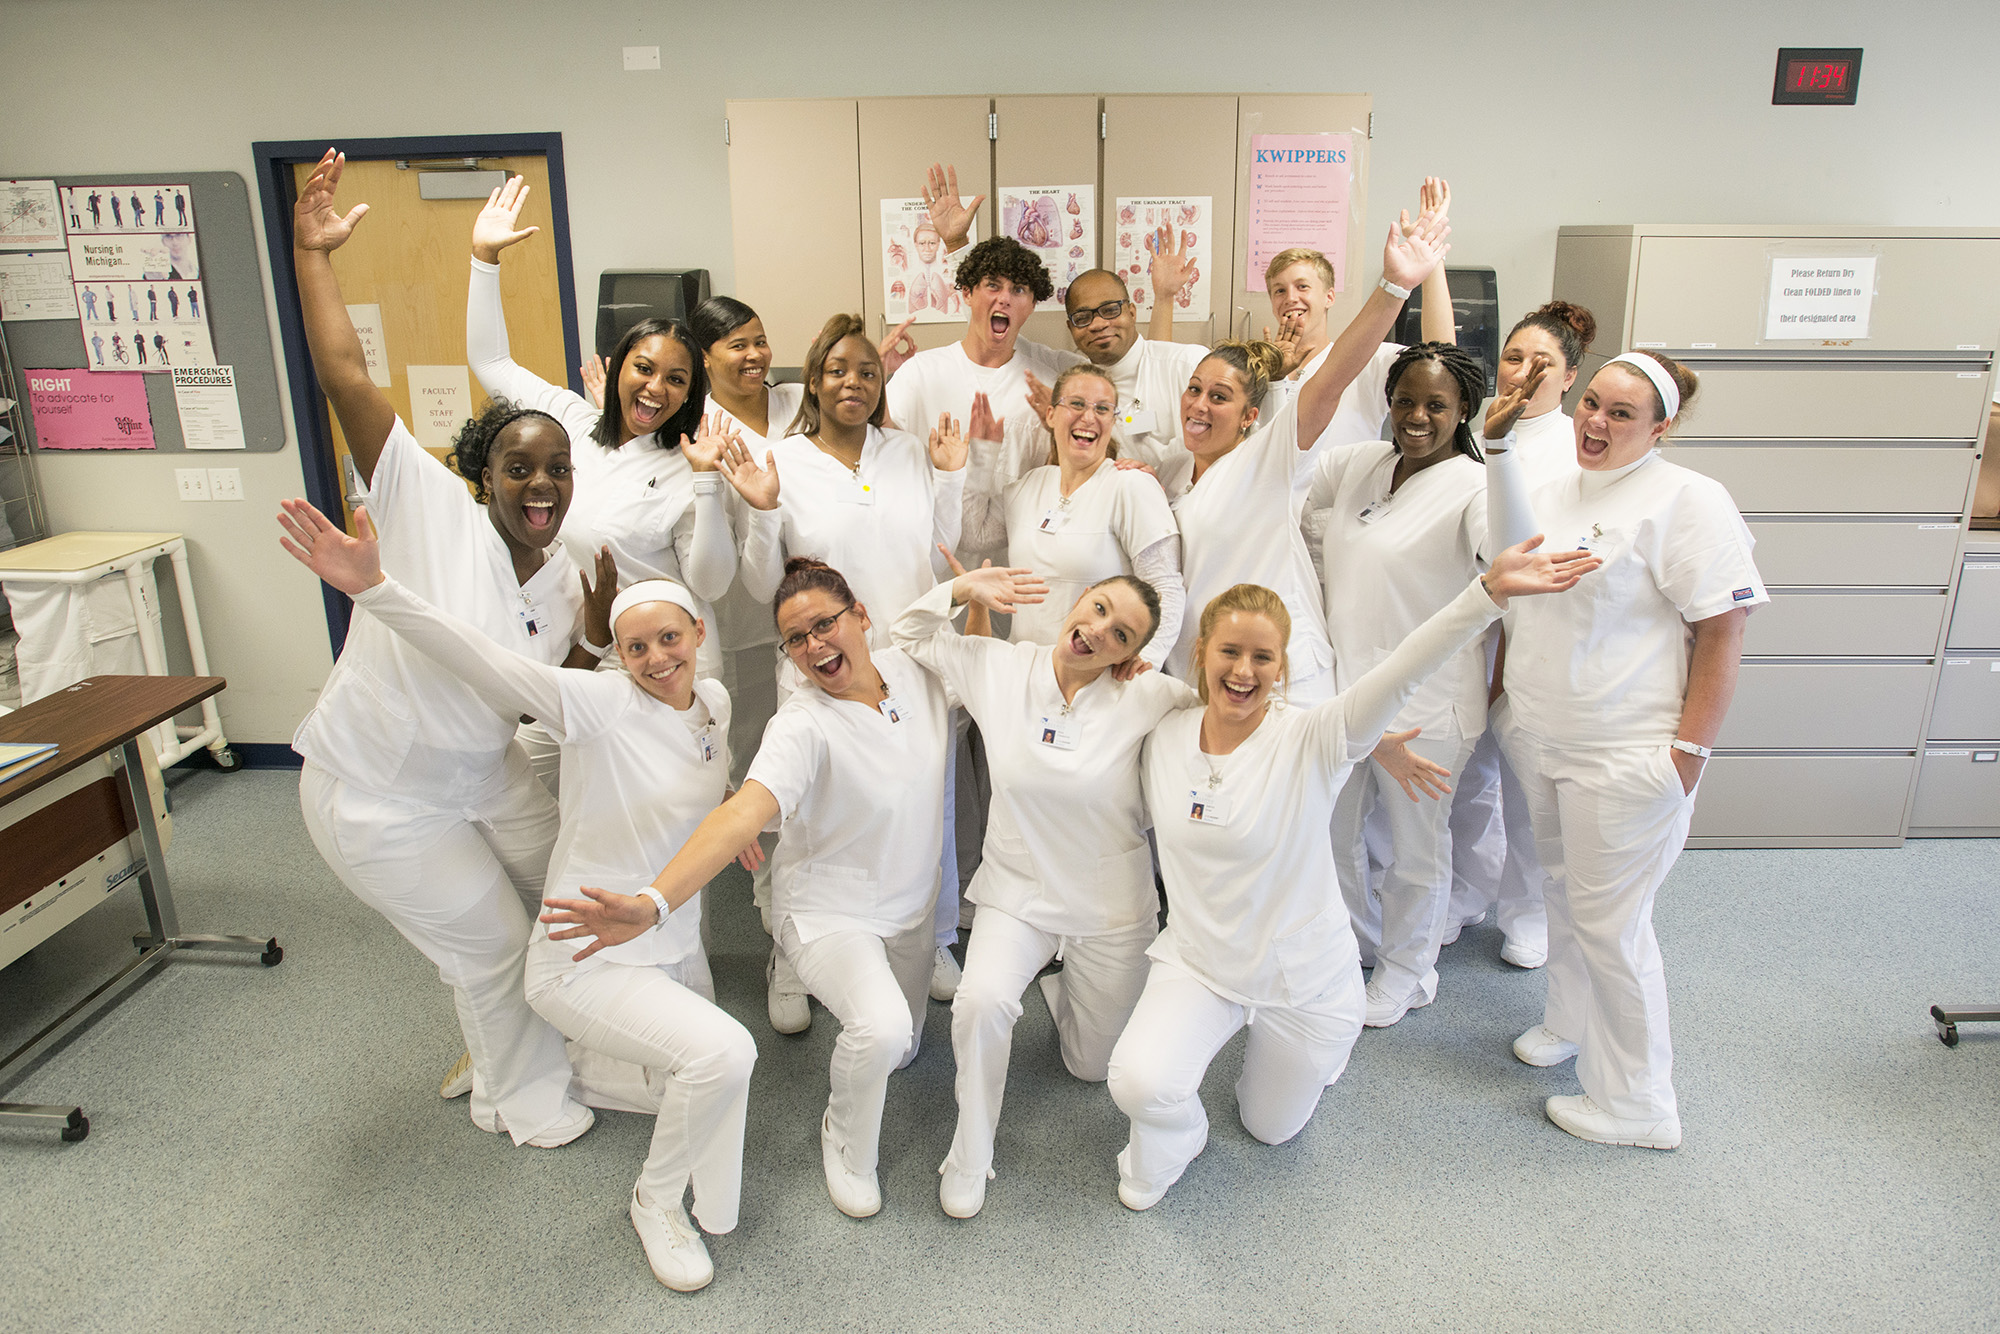 A group photo of CNA graduates celebrating their graduation in a CNA Lab on campus.